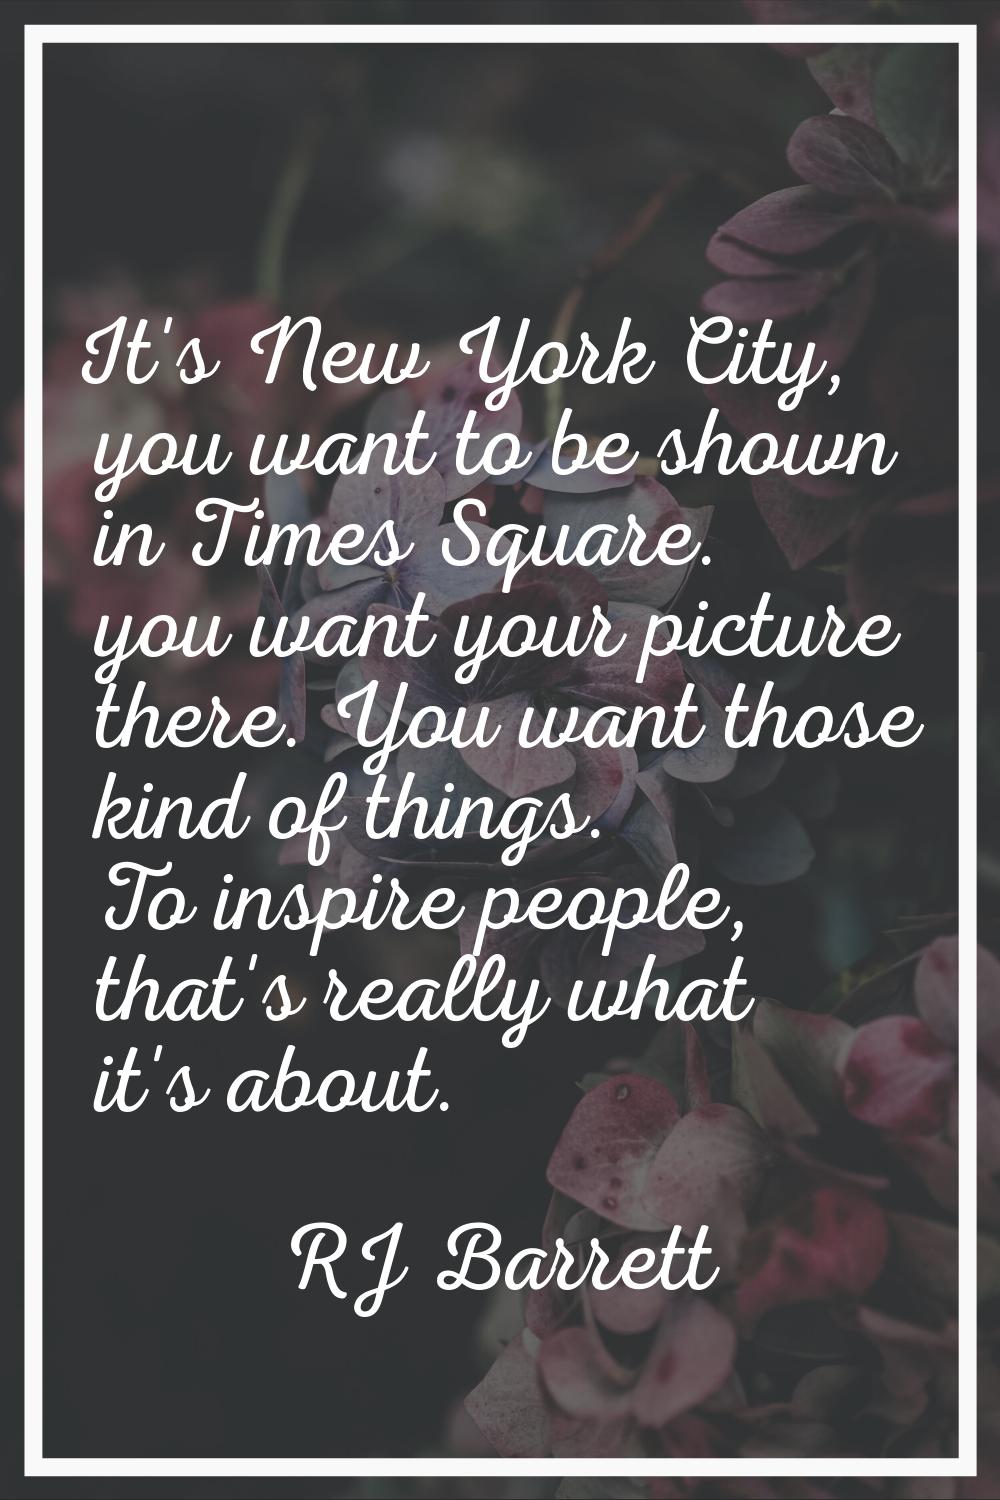 It's New York City, you want to be shown in Times Square. you want your picture there. You want tho